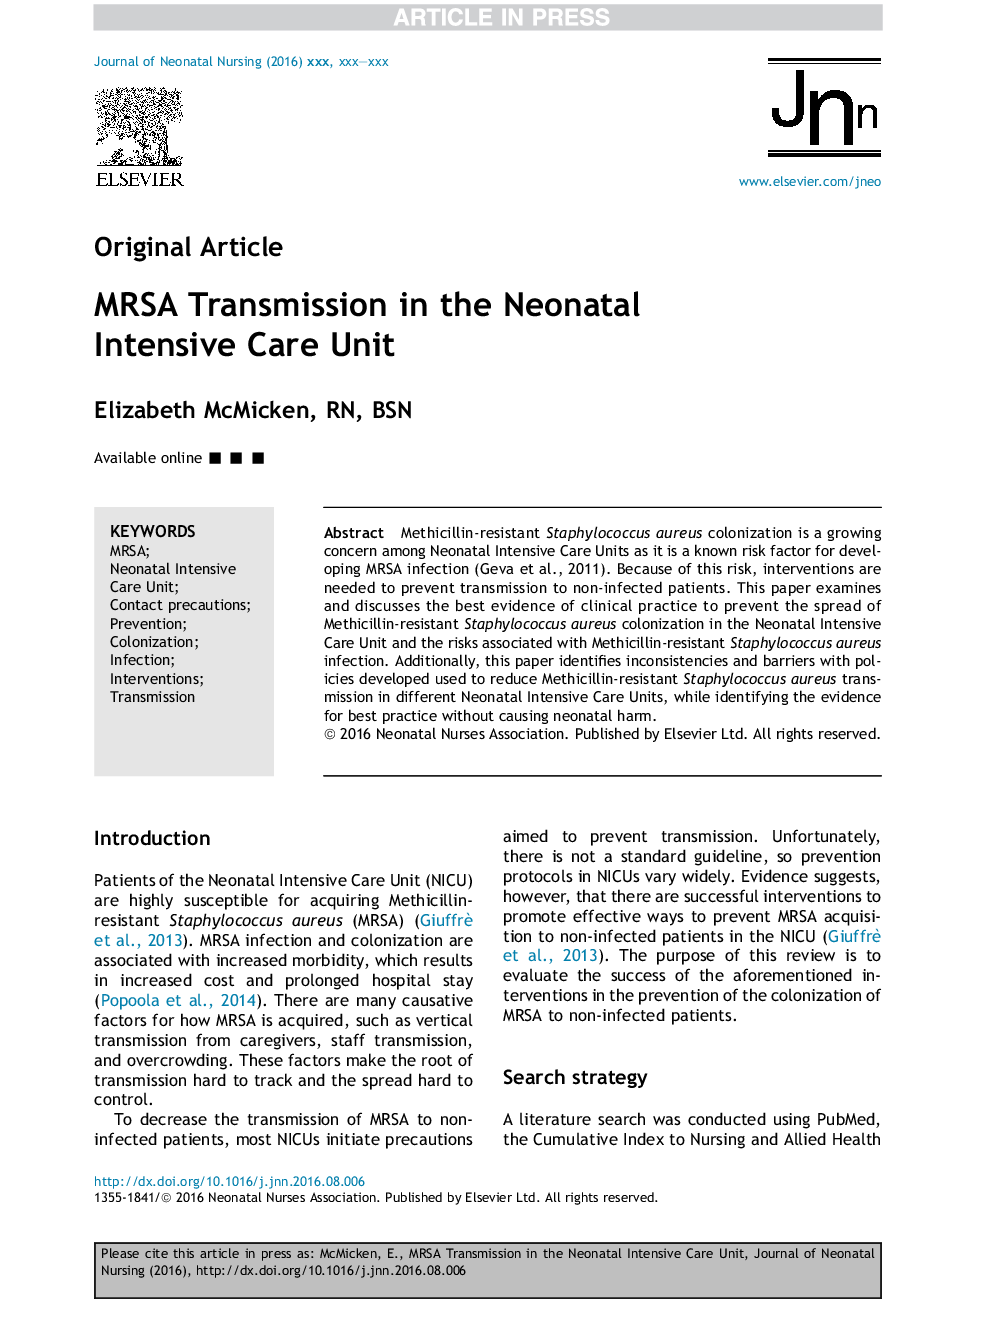 MRSA Transmission in the Neonatal Intensive Care Unit